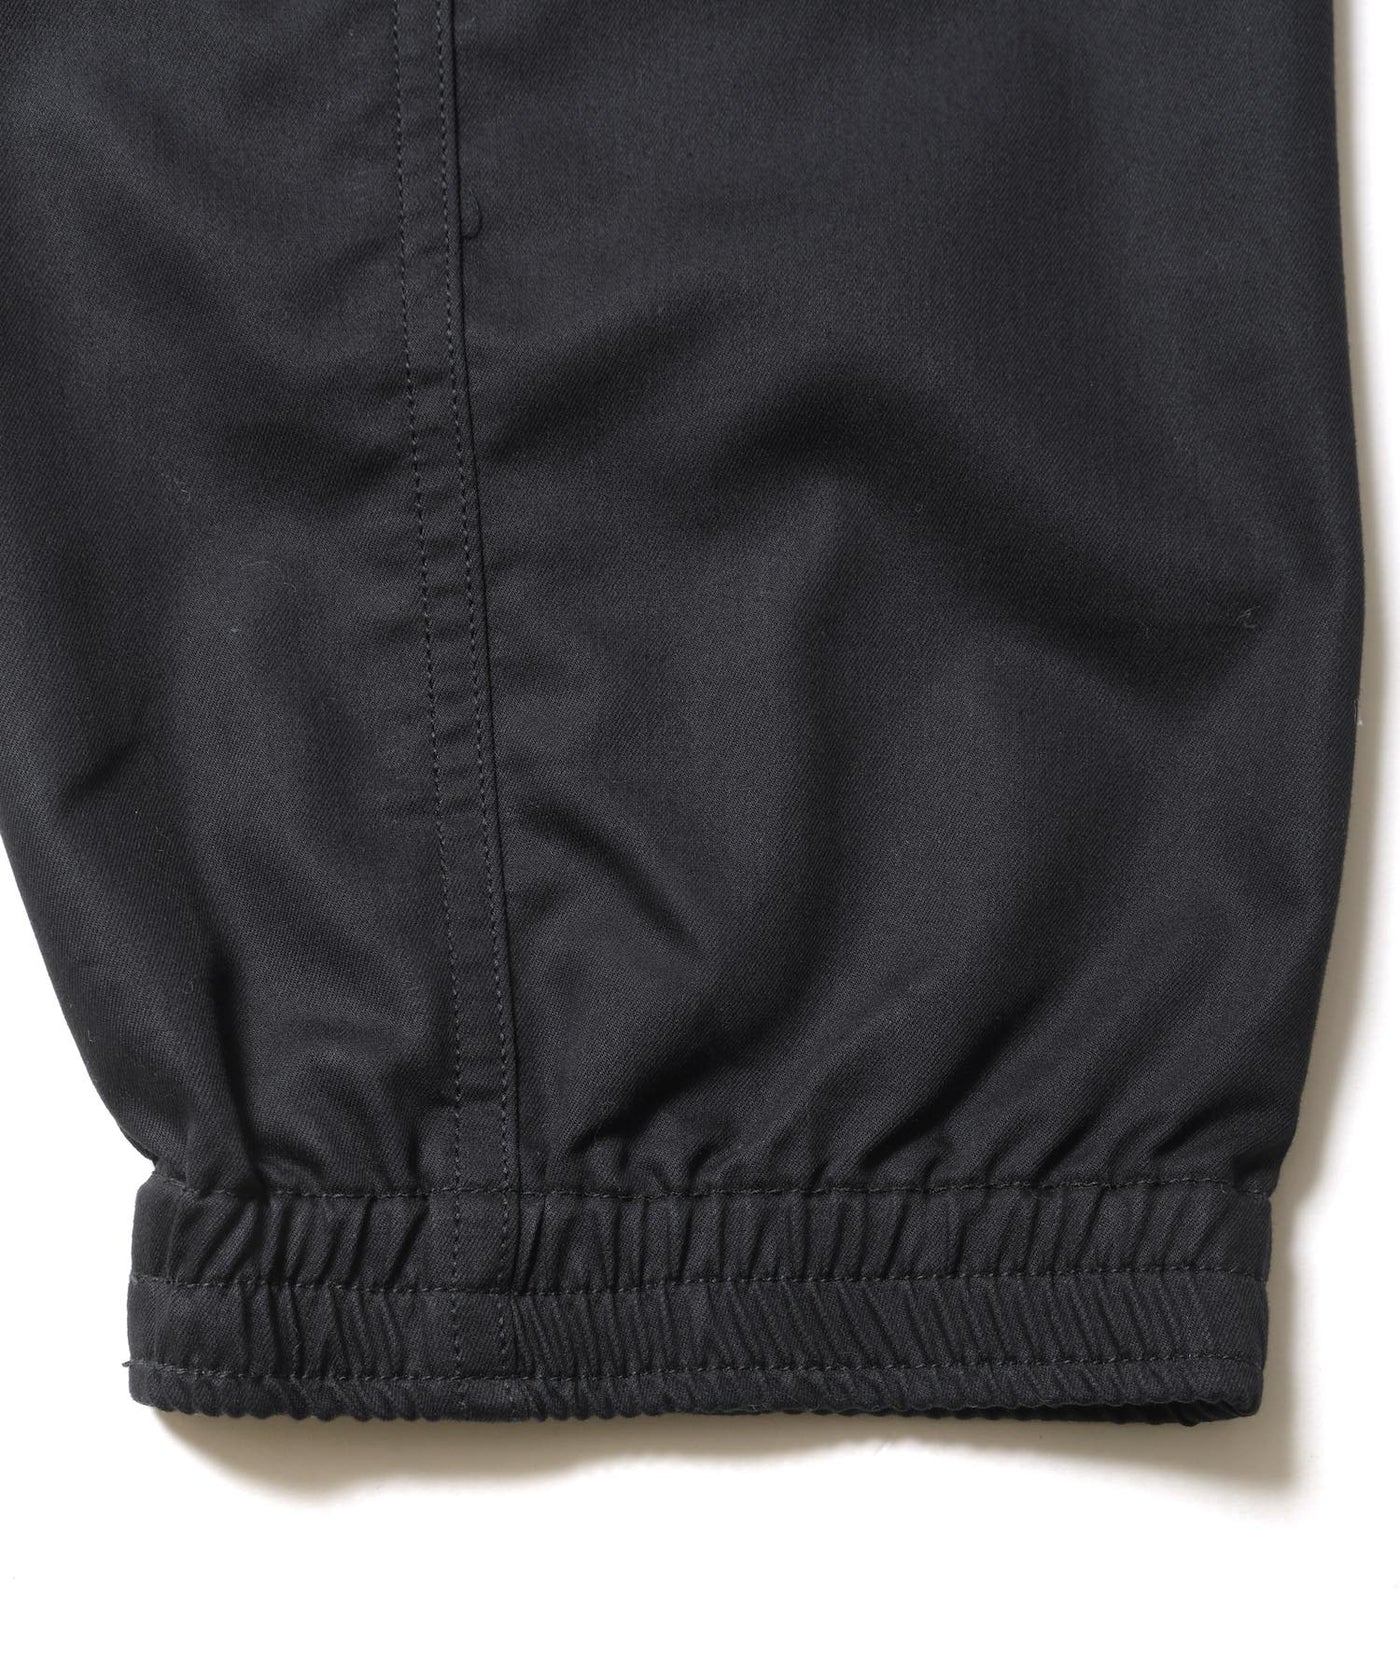 DRY COOL UTILITY JOGGER PANTS